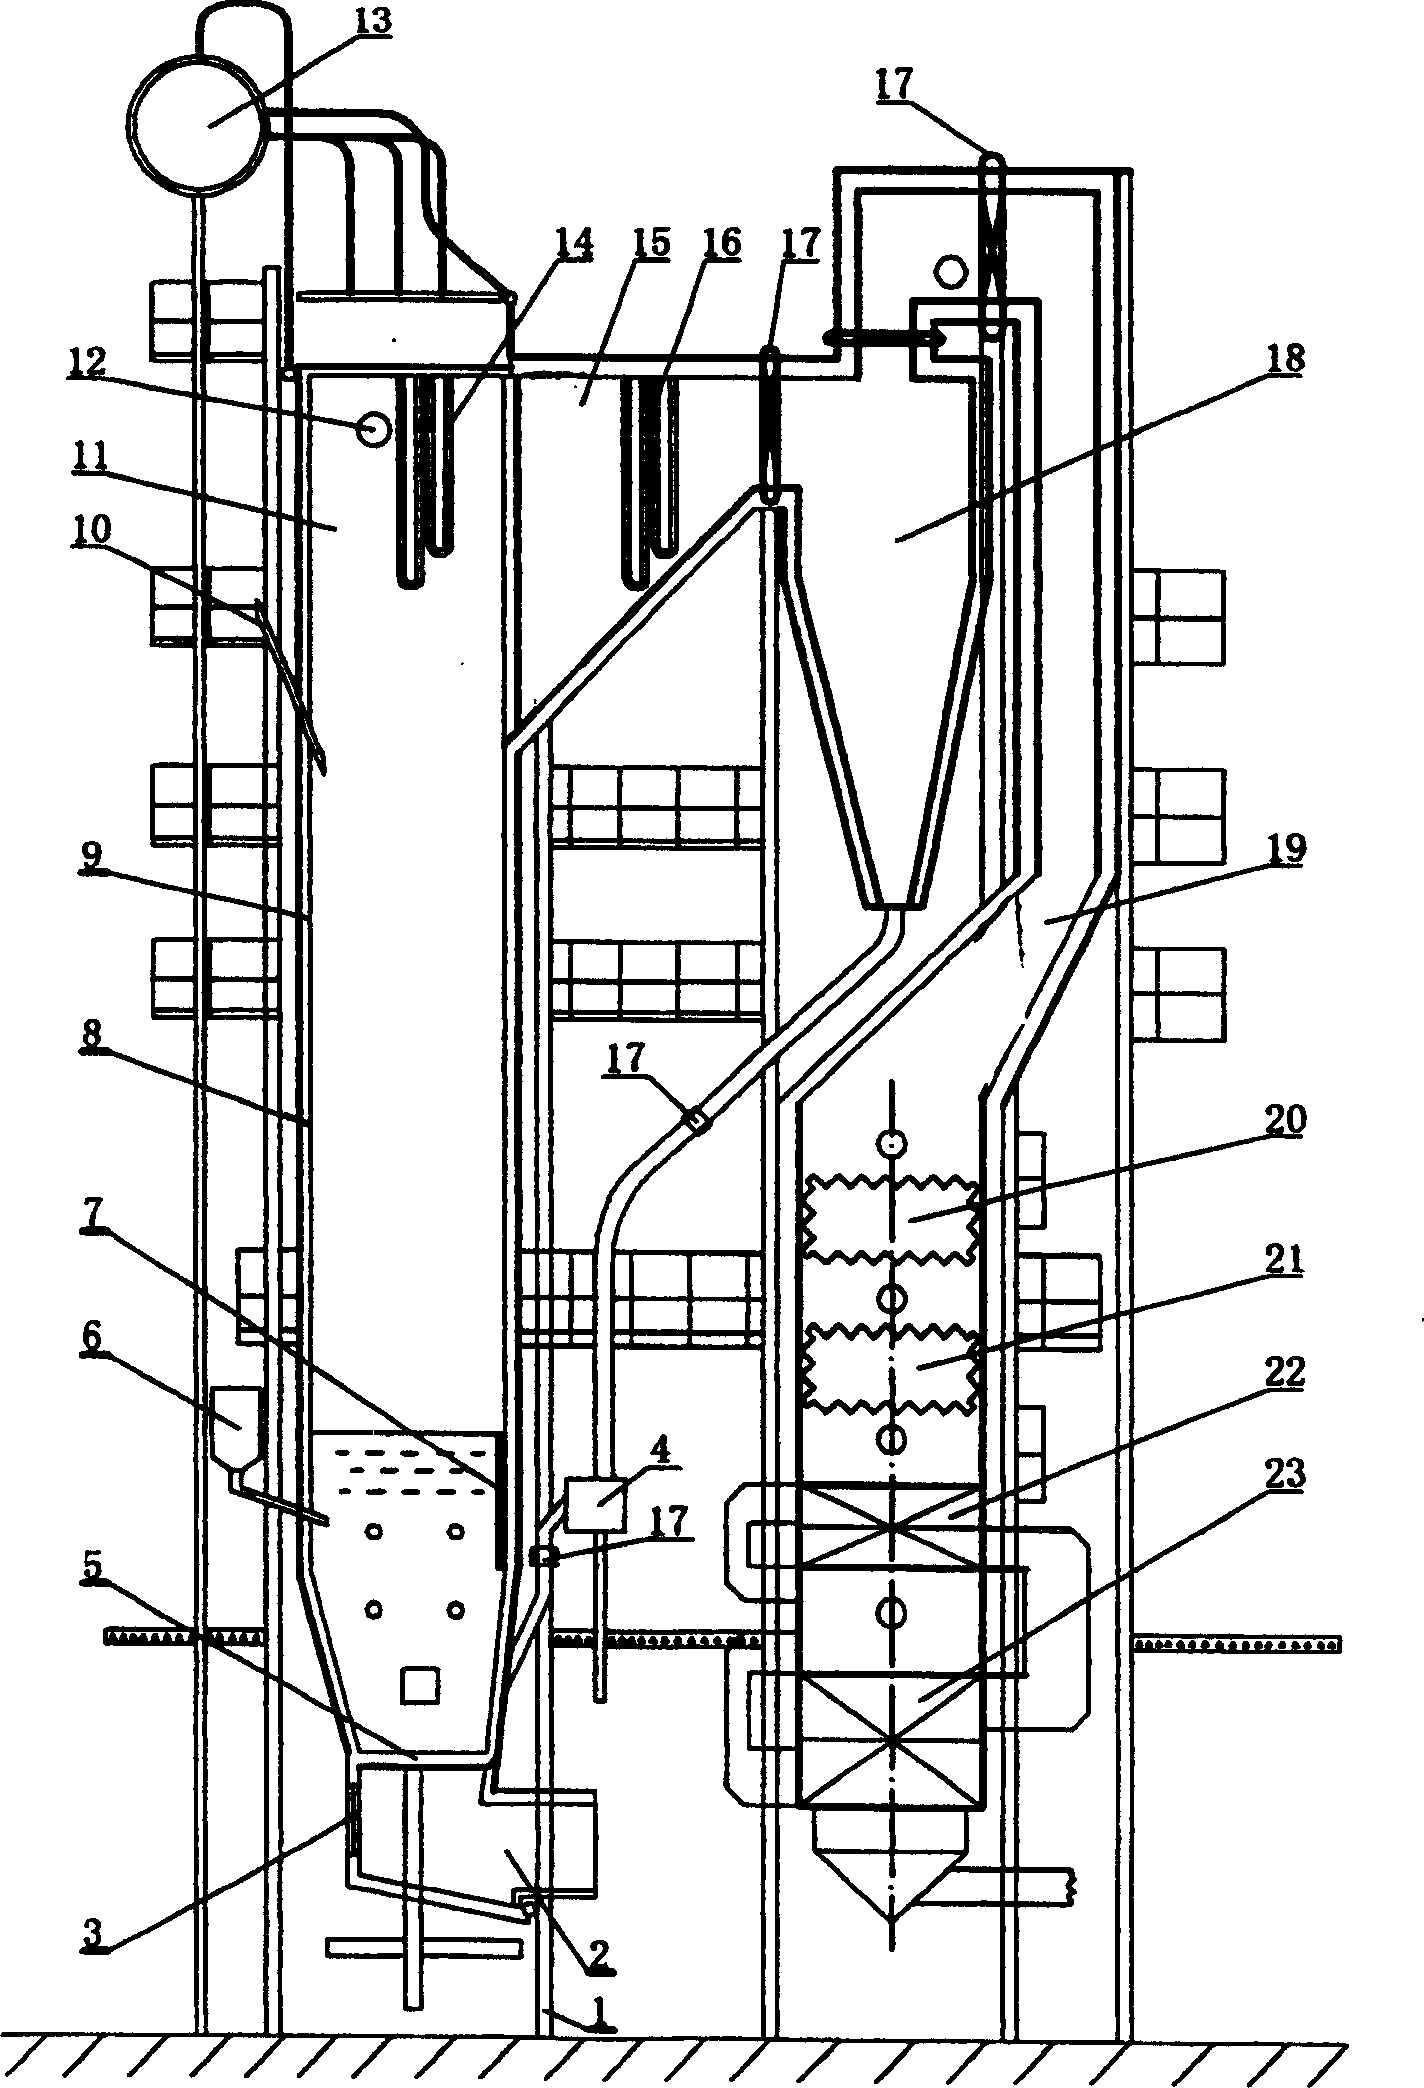 Oil field steam filling boiler of circulation fluidized bed using water coal slurry as fuel